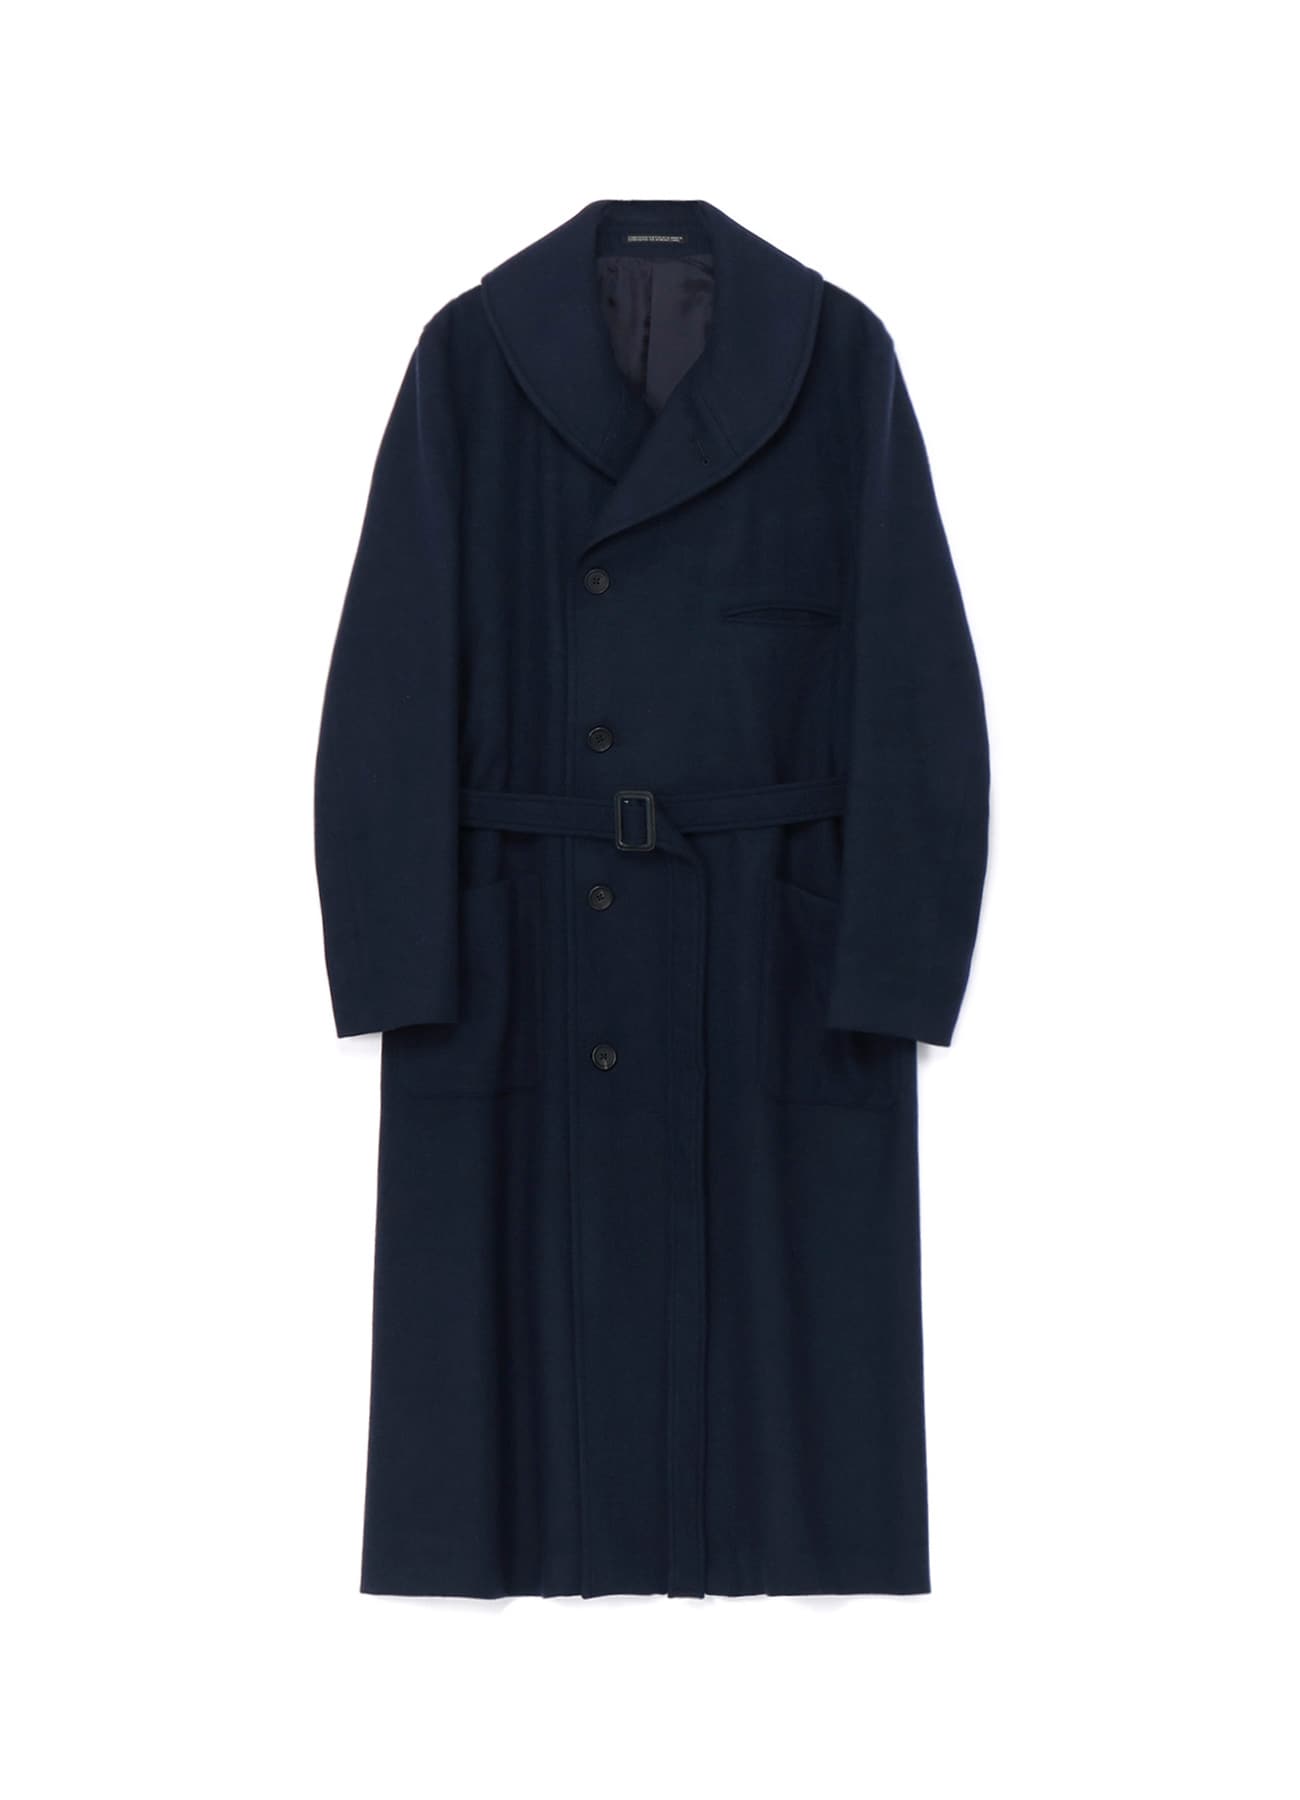 New Arrival | [Official] THE SHOP YOHJI YAMAMOTO (2/12 pages)